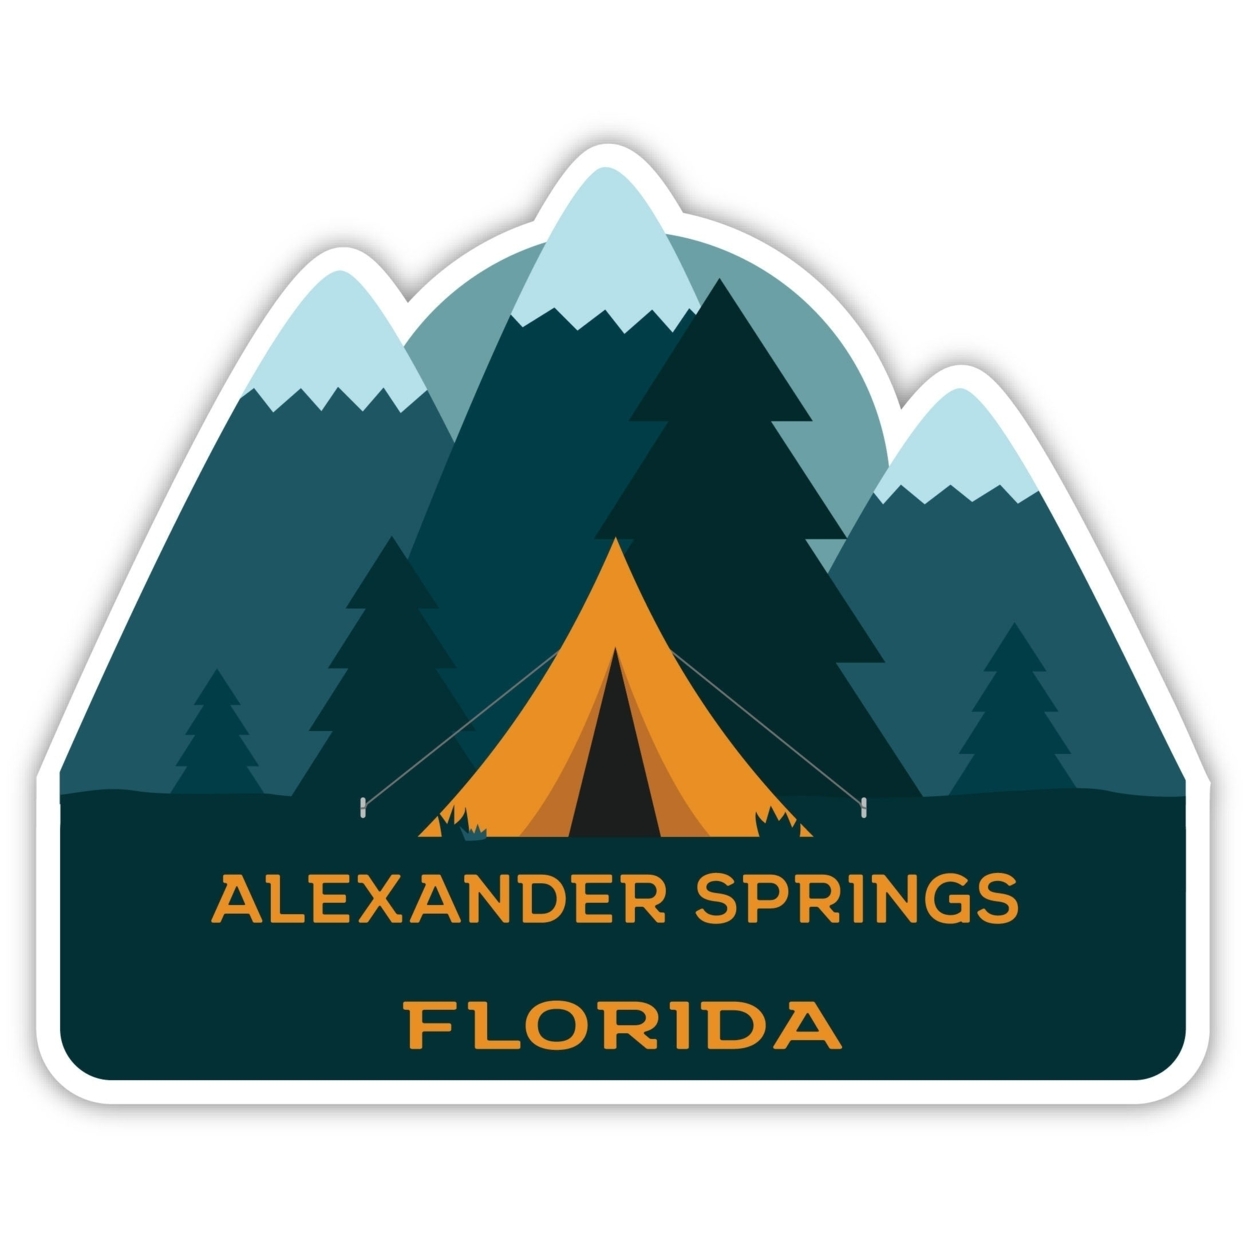 Alexander Springs Florida Souvenir Decorative Stickers (Choose Theme And Size) - 4-Pack, 8-Inch, Tent